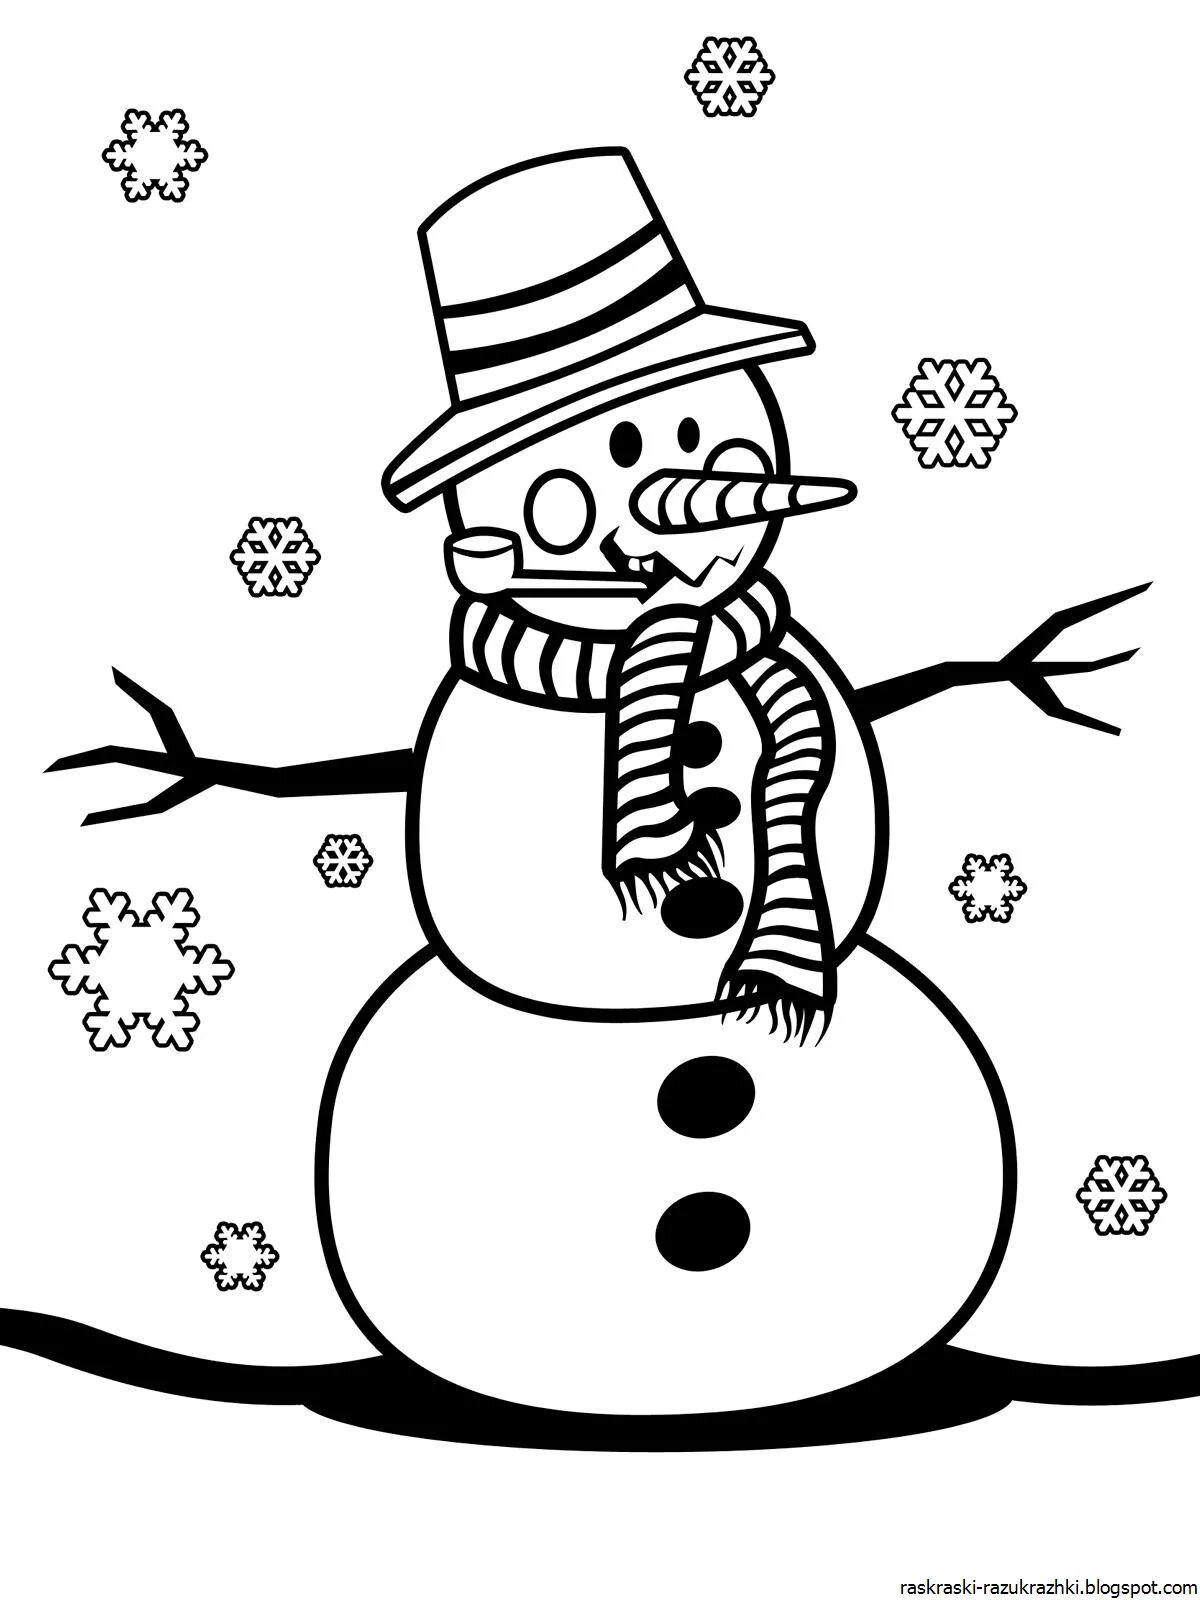 Incredible snowman drawing for kids